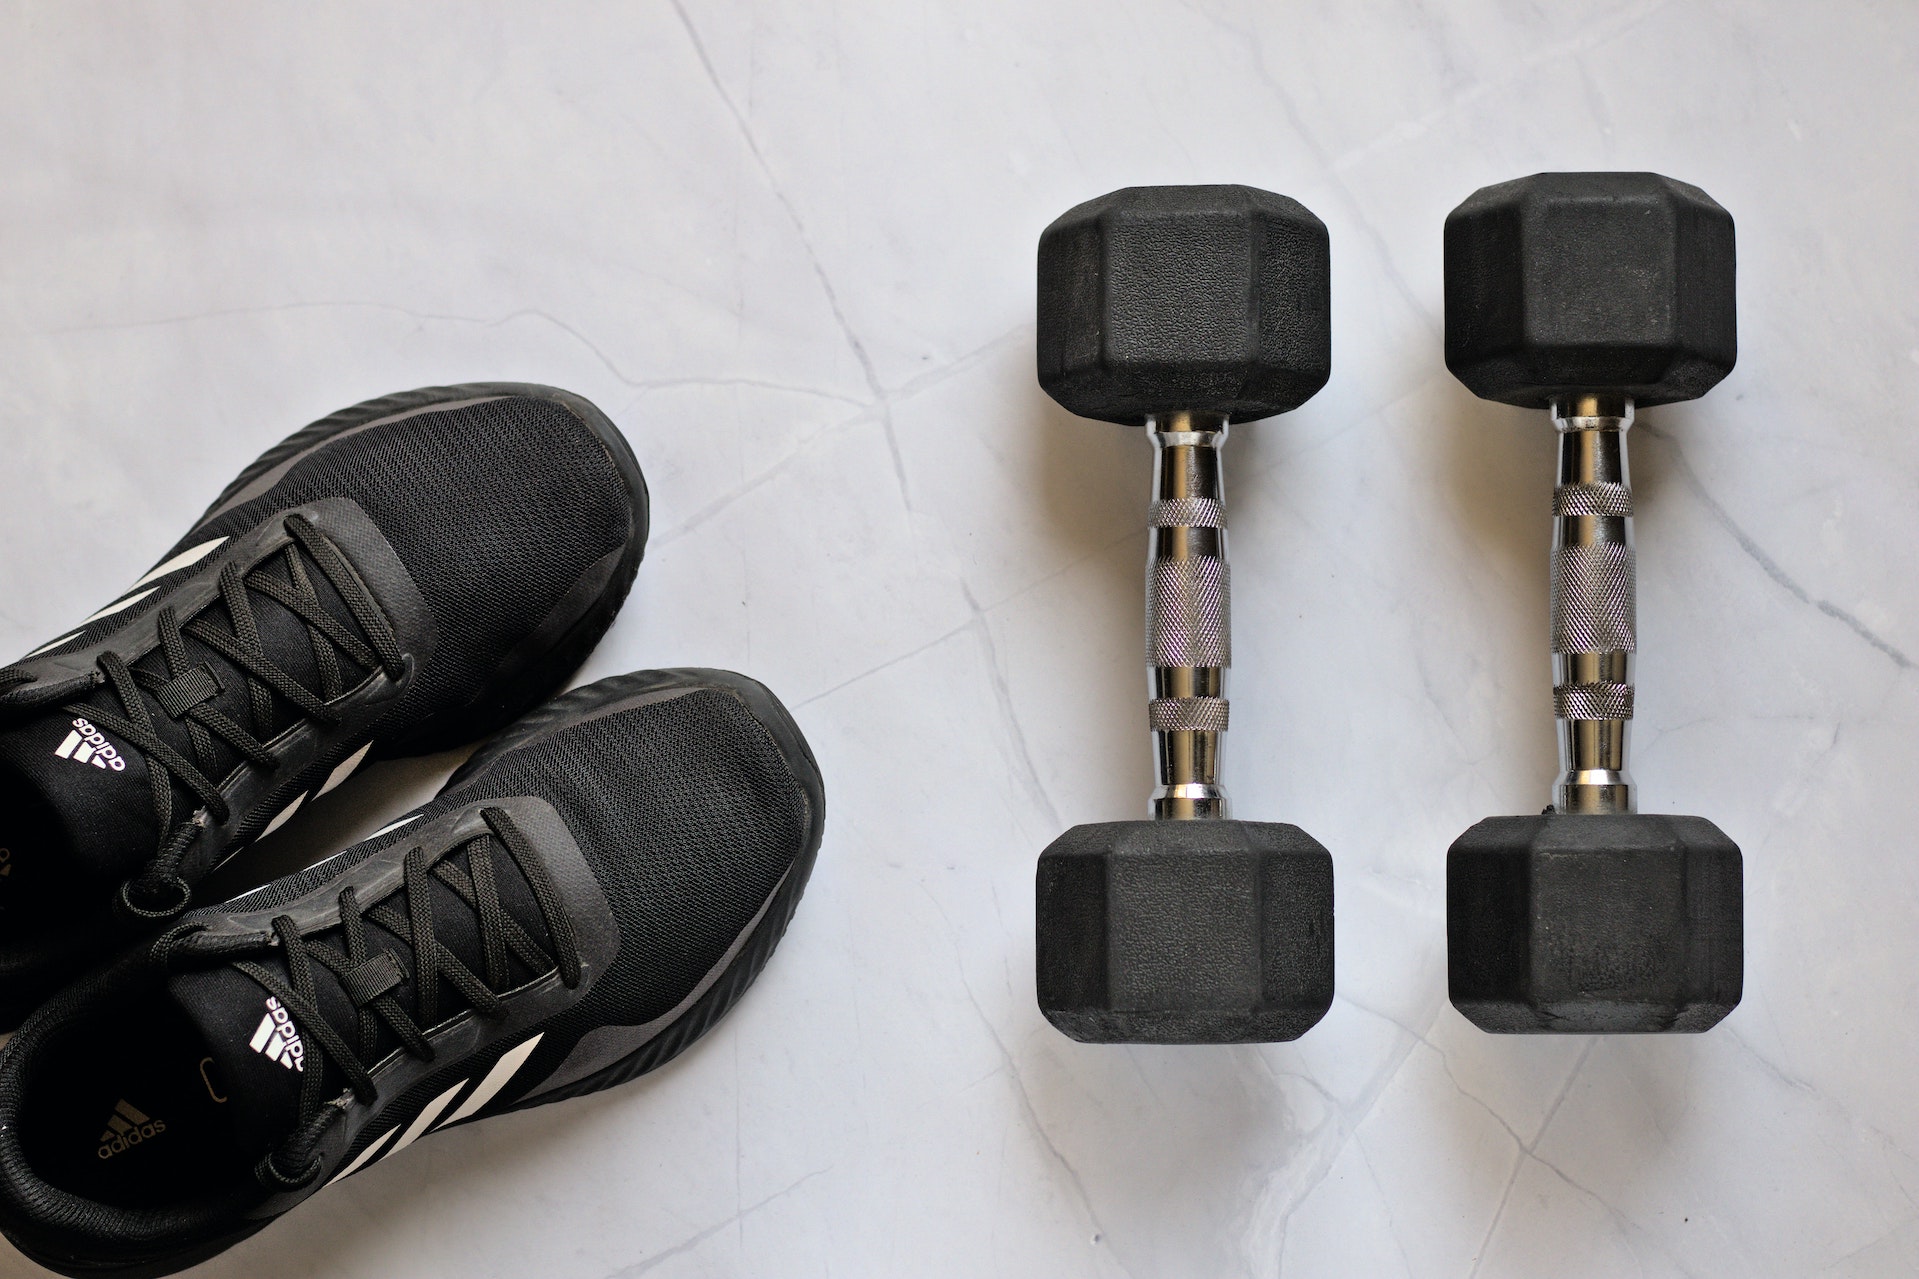 Shoes and dumbbells.